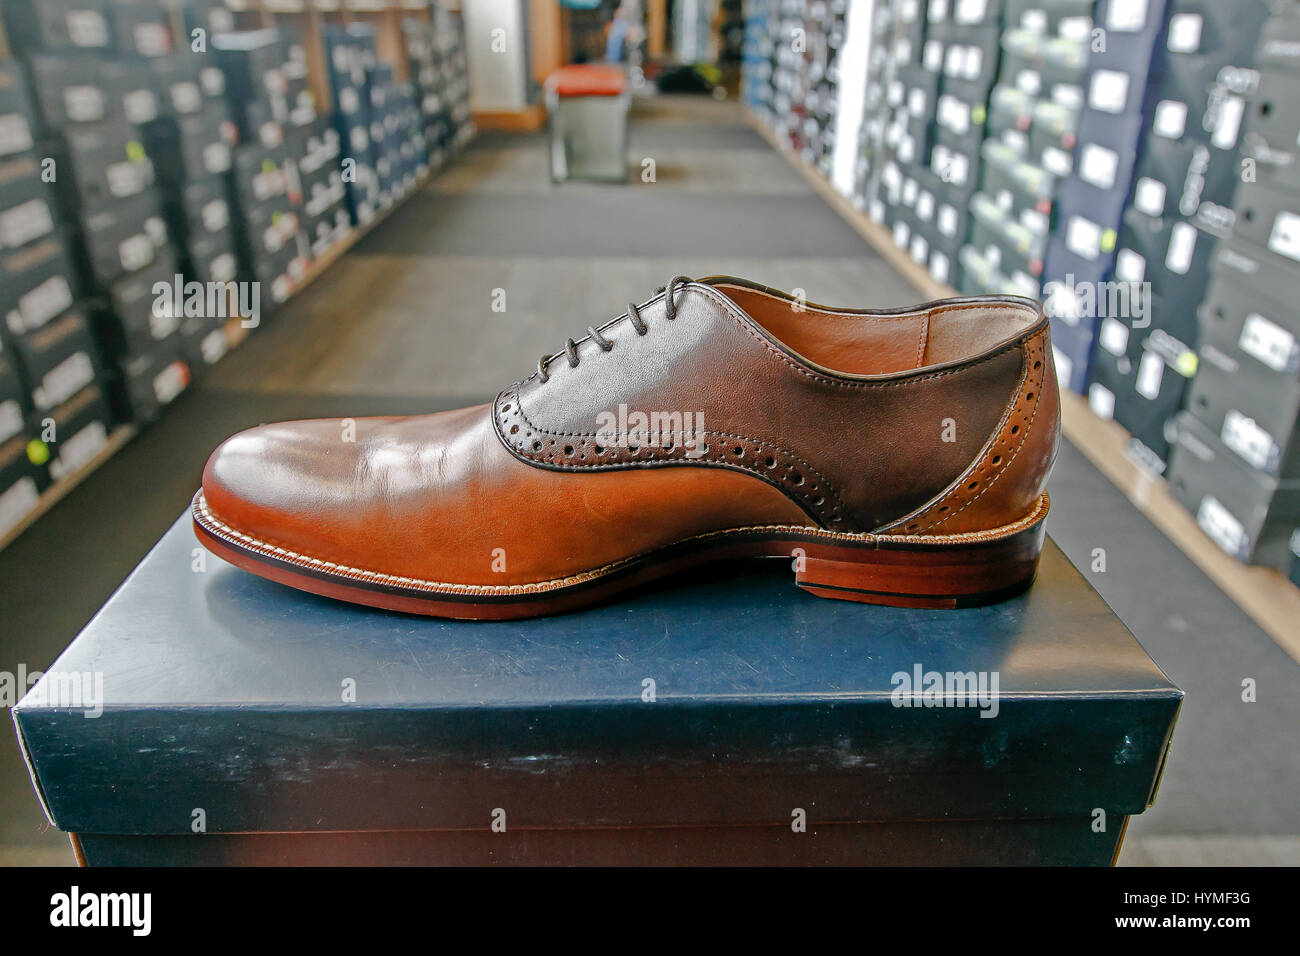 Mens dress shoe in a shoe store with stacks of boxes in the background. Stock Photo